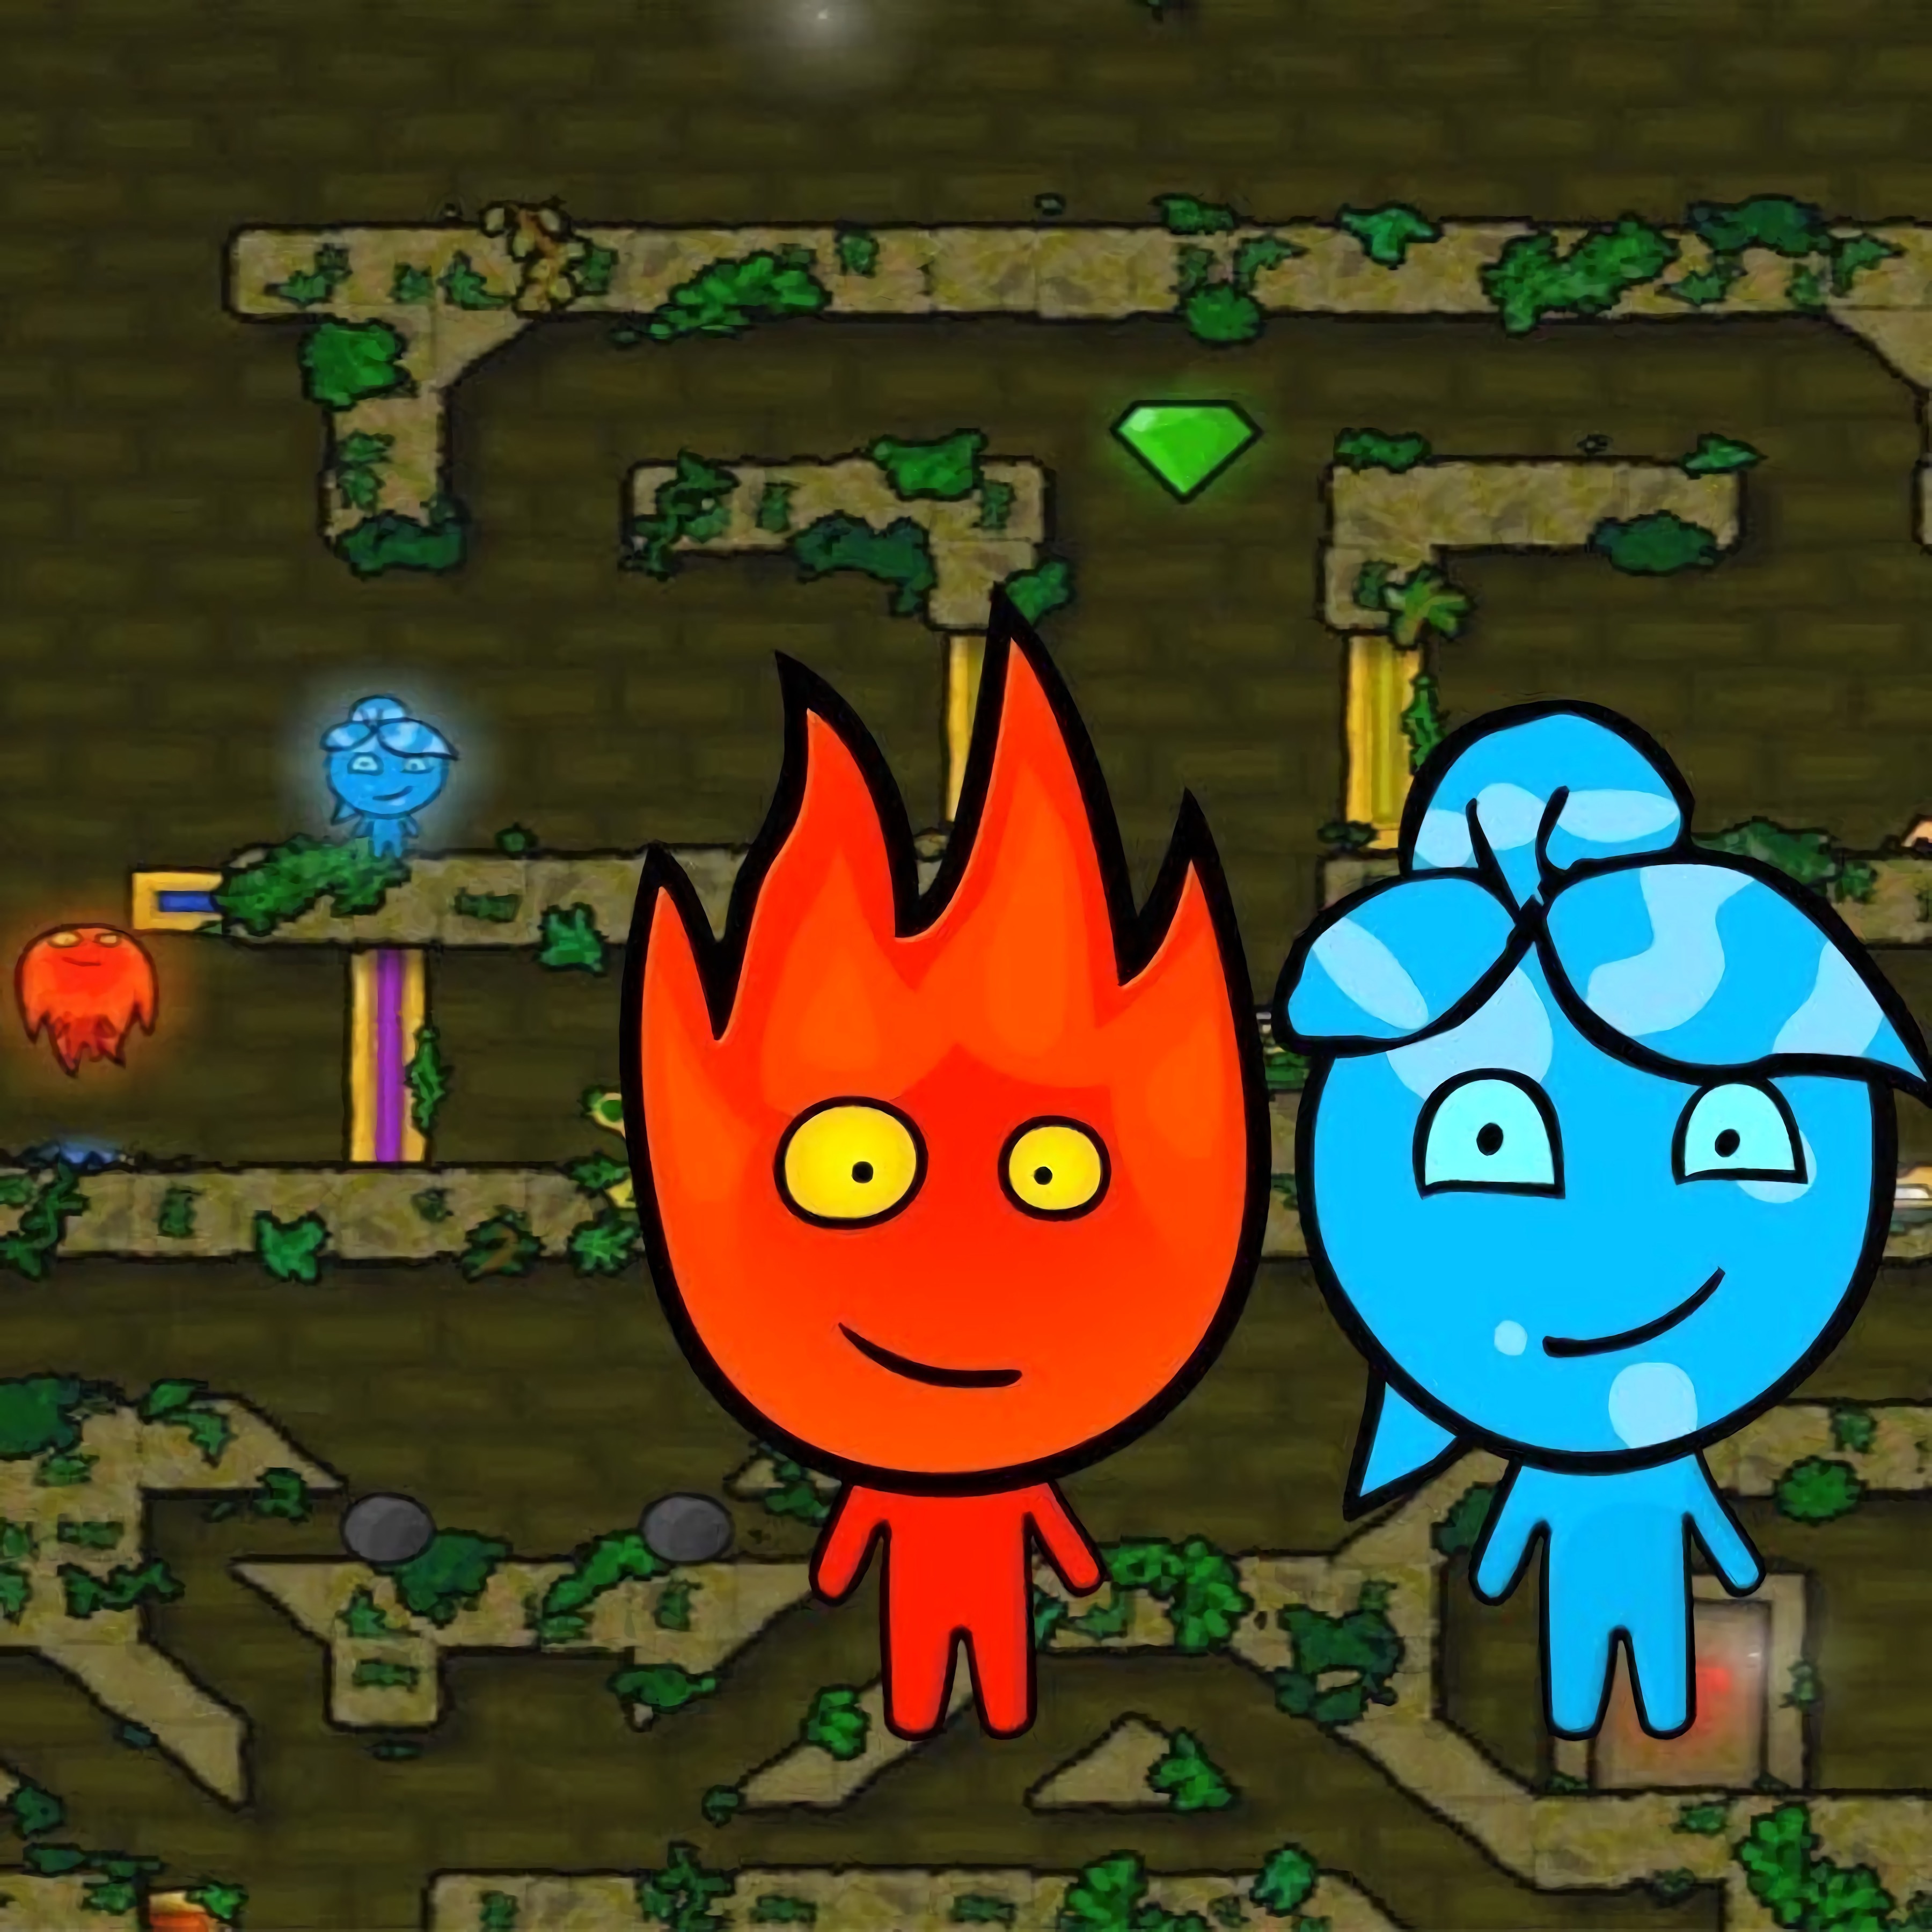 Fireboy and Watergirl 1: Forest Temple